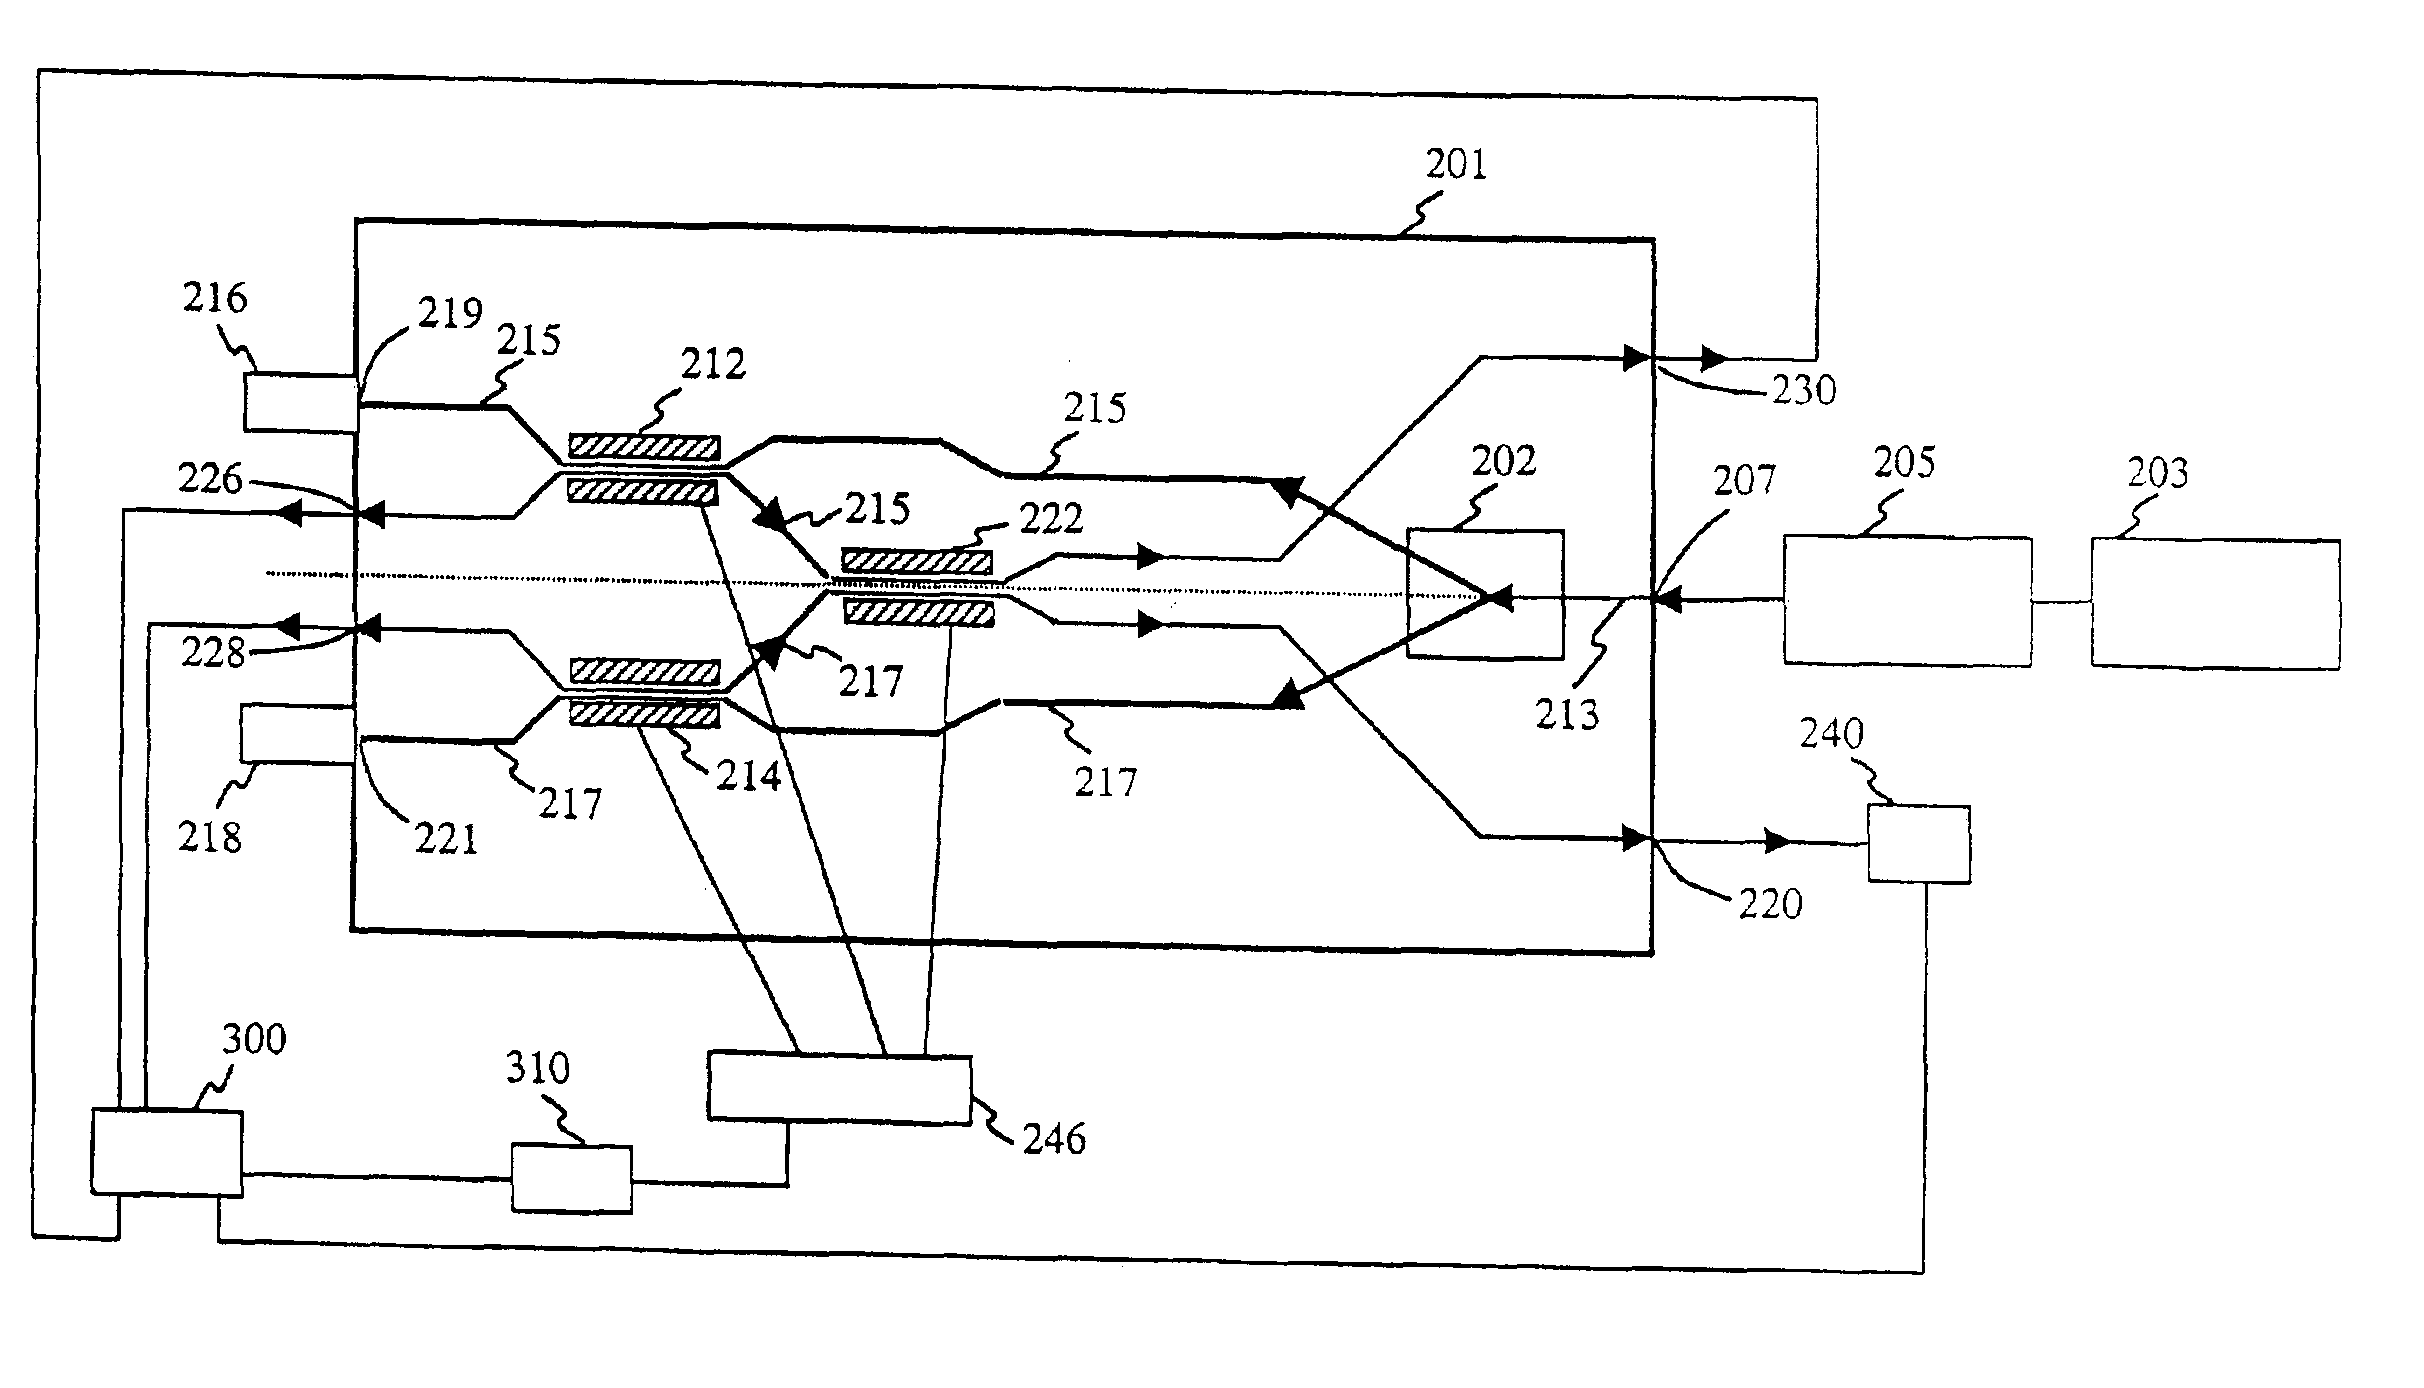 Integrated optical circuit for effecting stable injection locking of laser diode pairs used for microwave signal synthesis